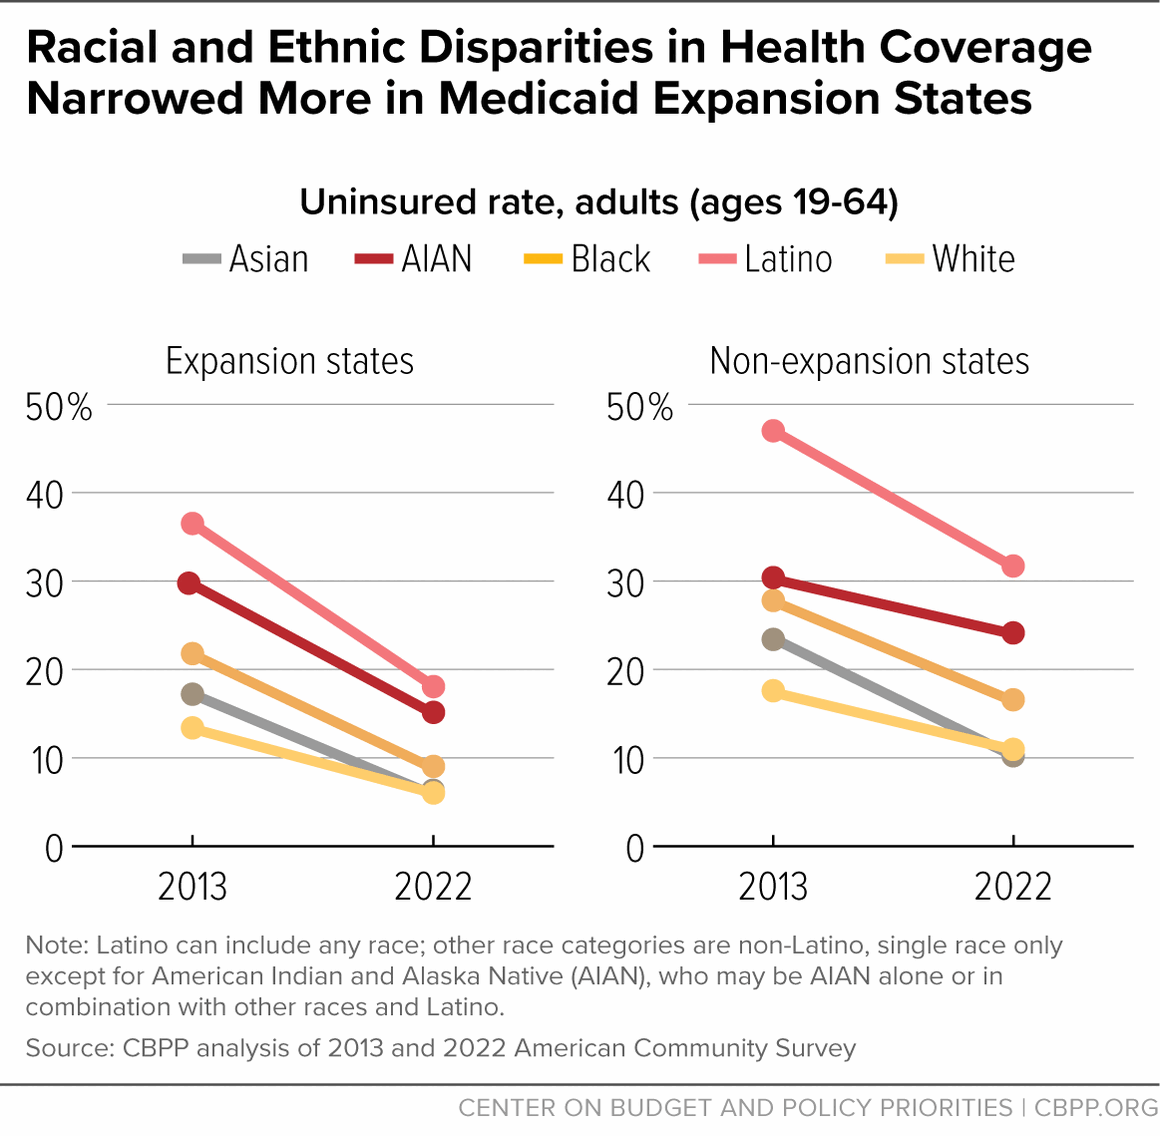 Racial and Ethnic Disparities in Health Coverage Narrowed More in Medicaid Expansion States